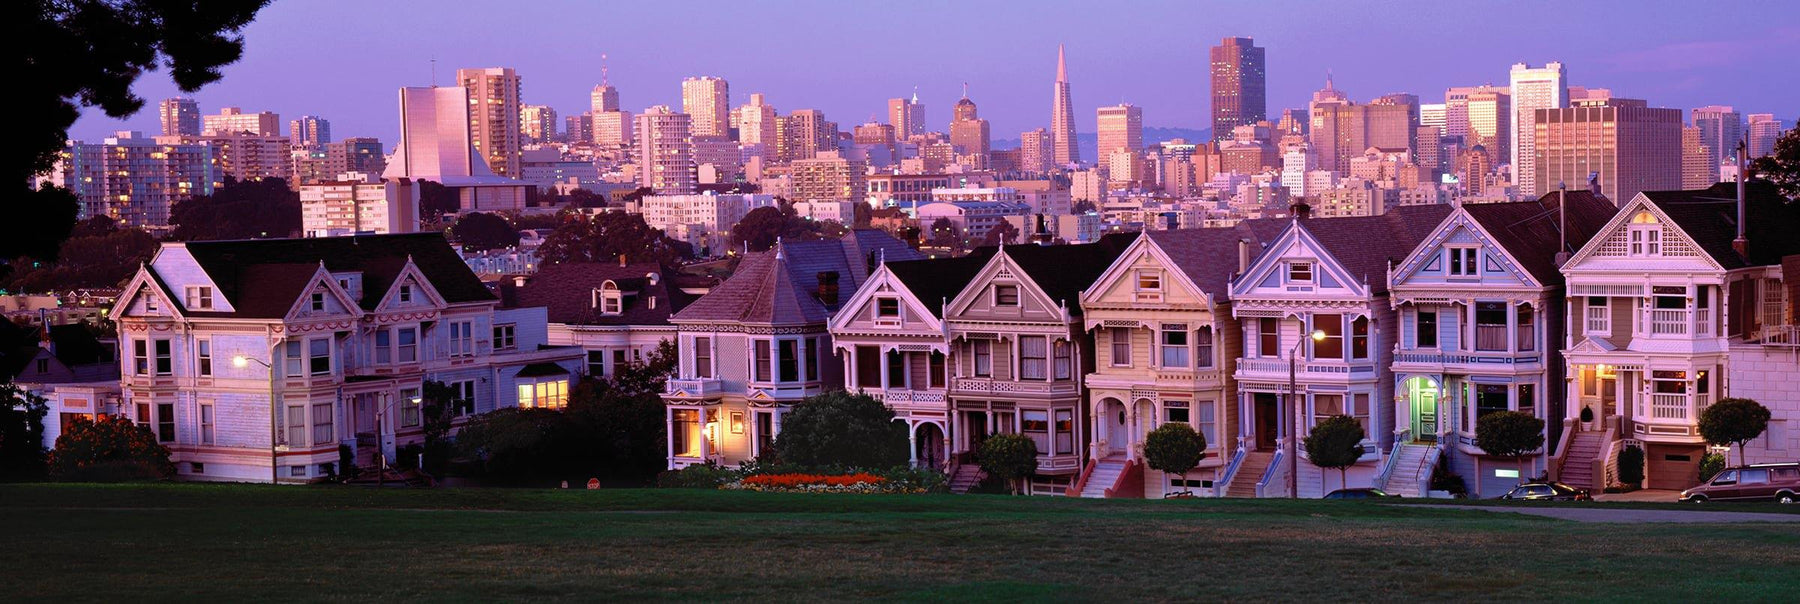 Row of Victorian houses across from a grass area with the skyscrapers of San Francisco in the background